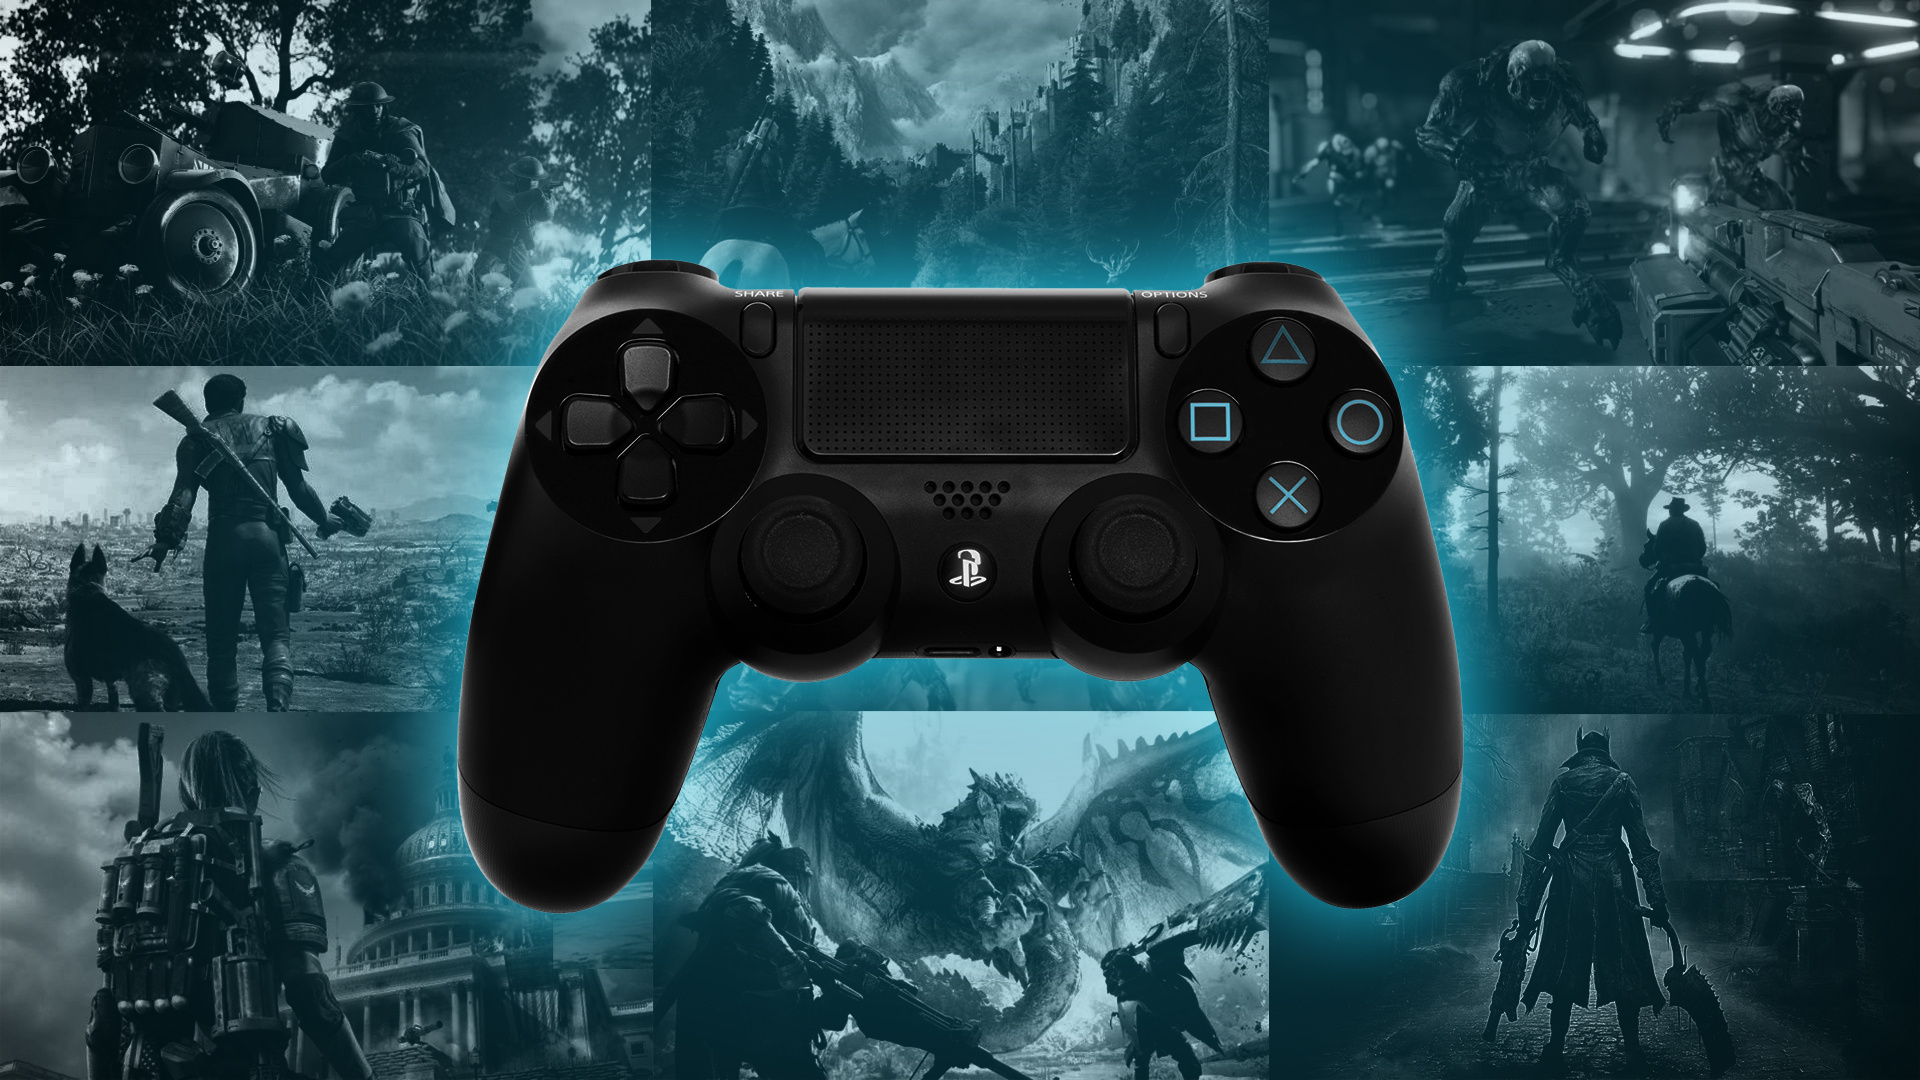 The PlayStation: PS4 games, The DualShock 4, A touchpad. 1920x1080 Full HD Wallpaper.